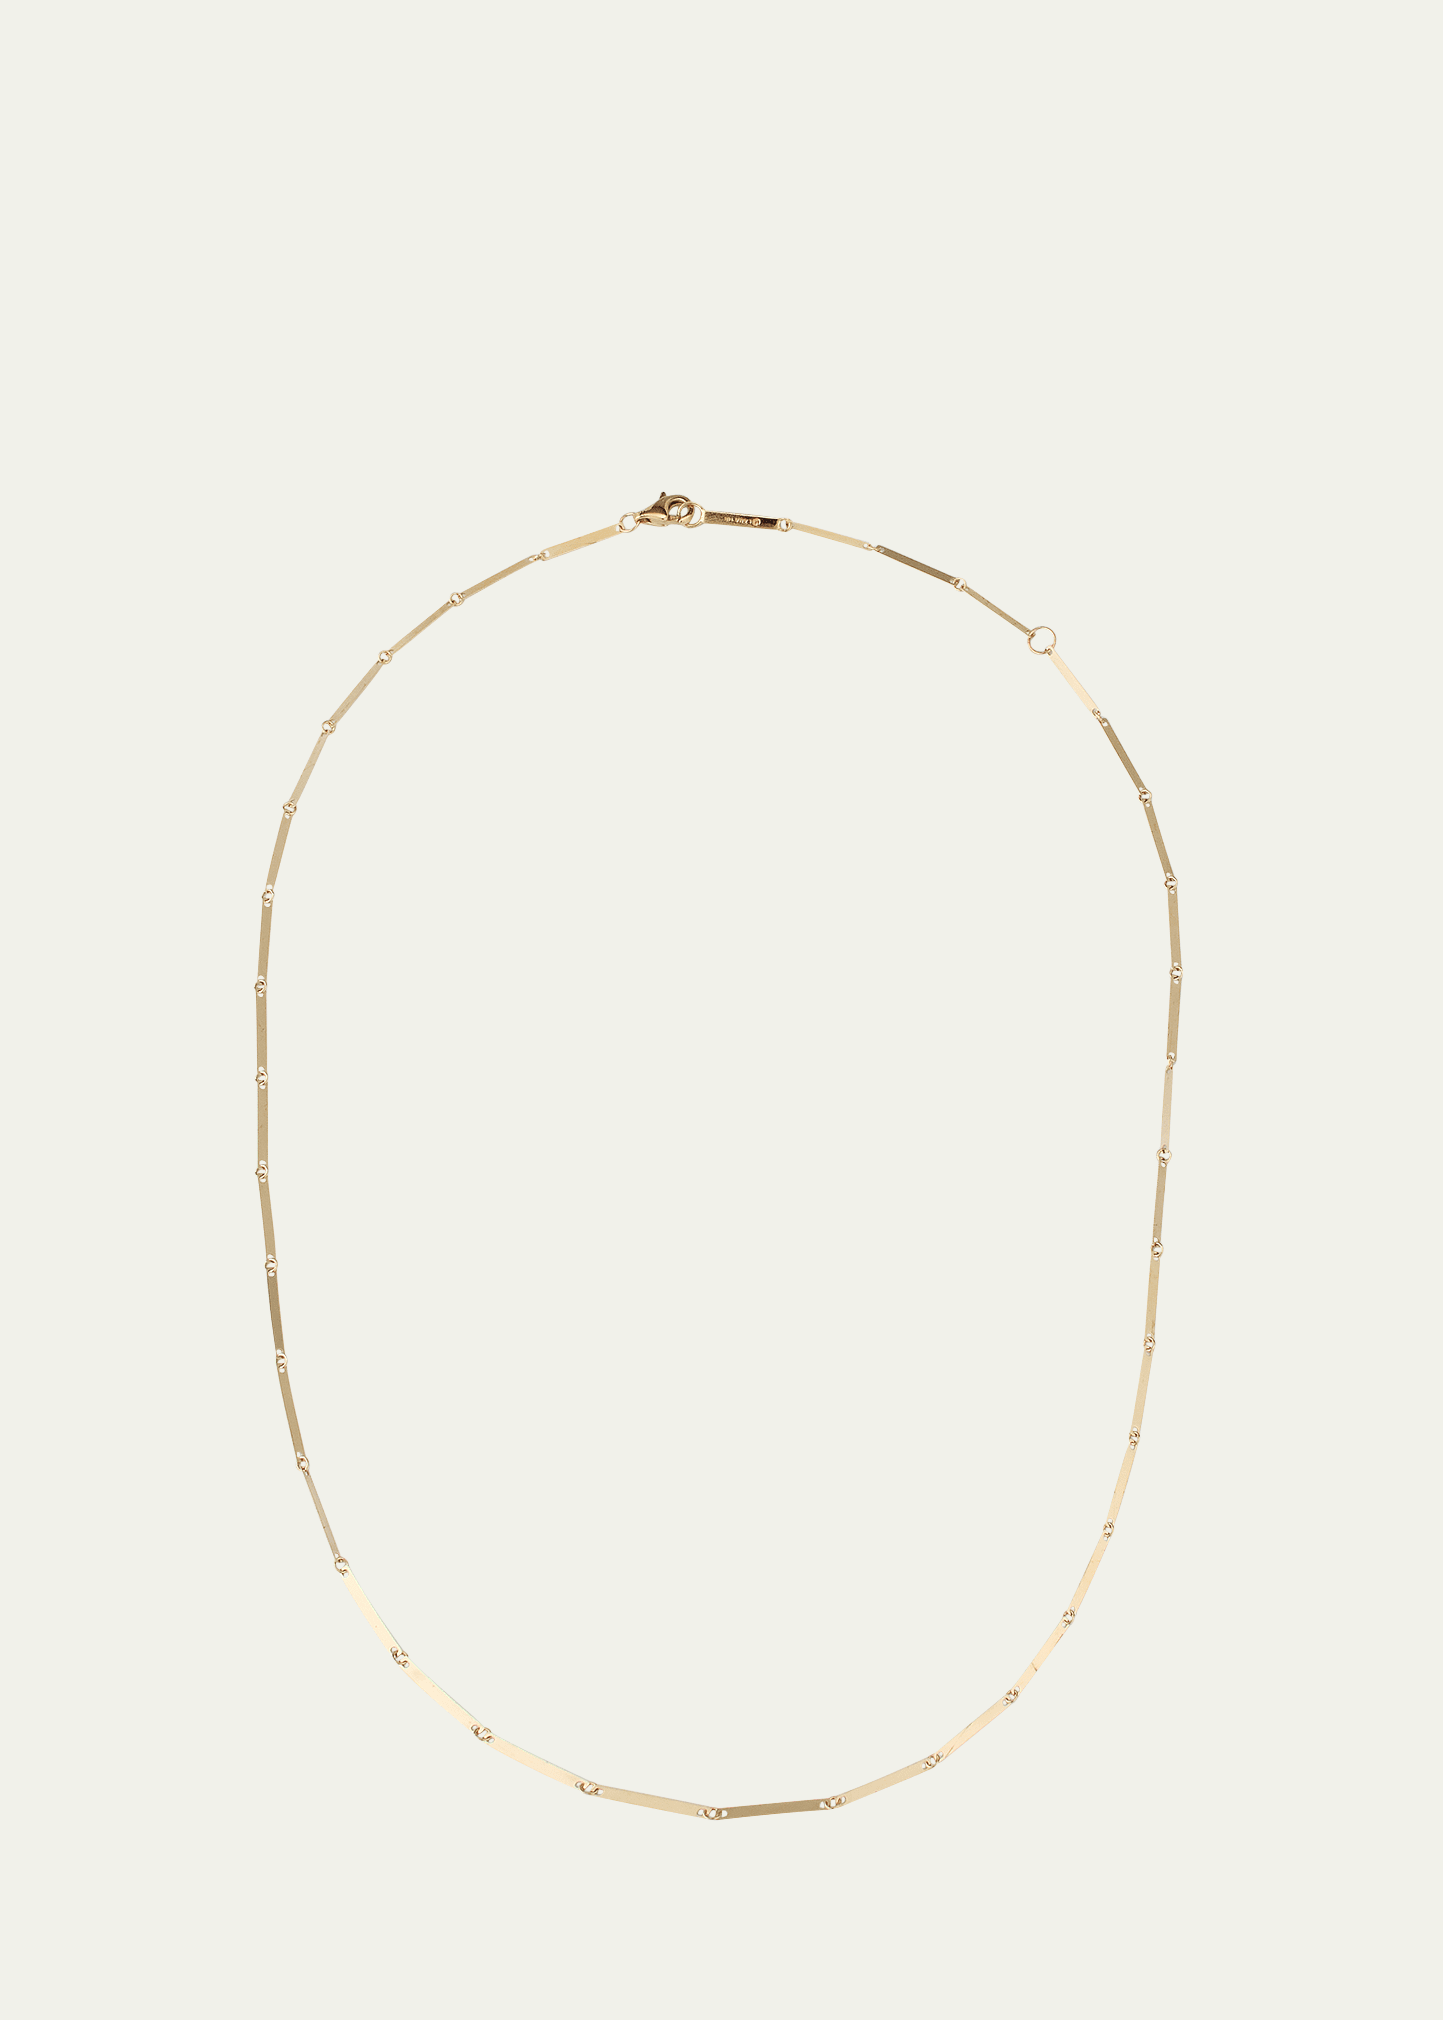 LANA 14K YELLOW GOLD LASER RECTANGLE CHAIN NECKLACE, 18"